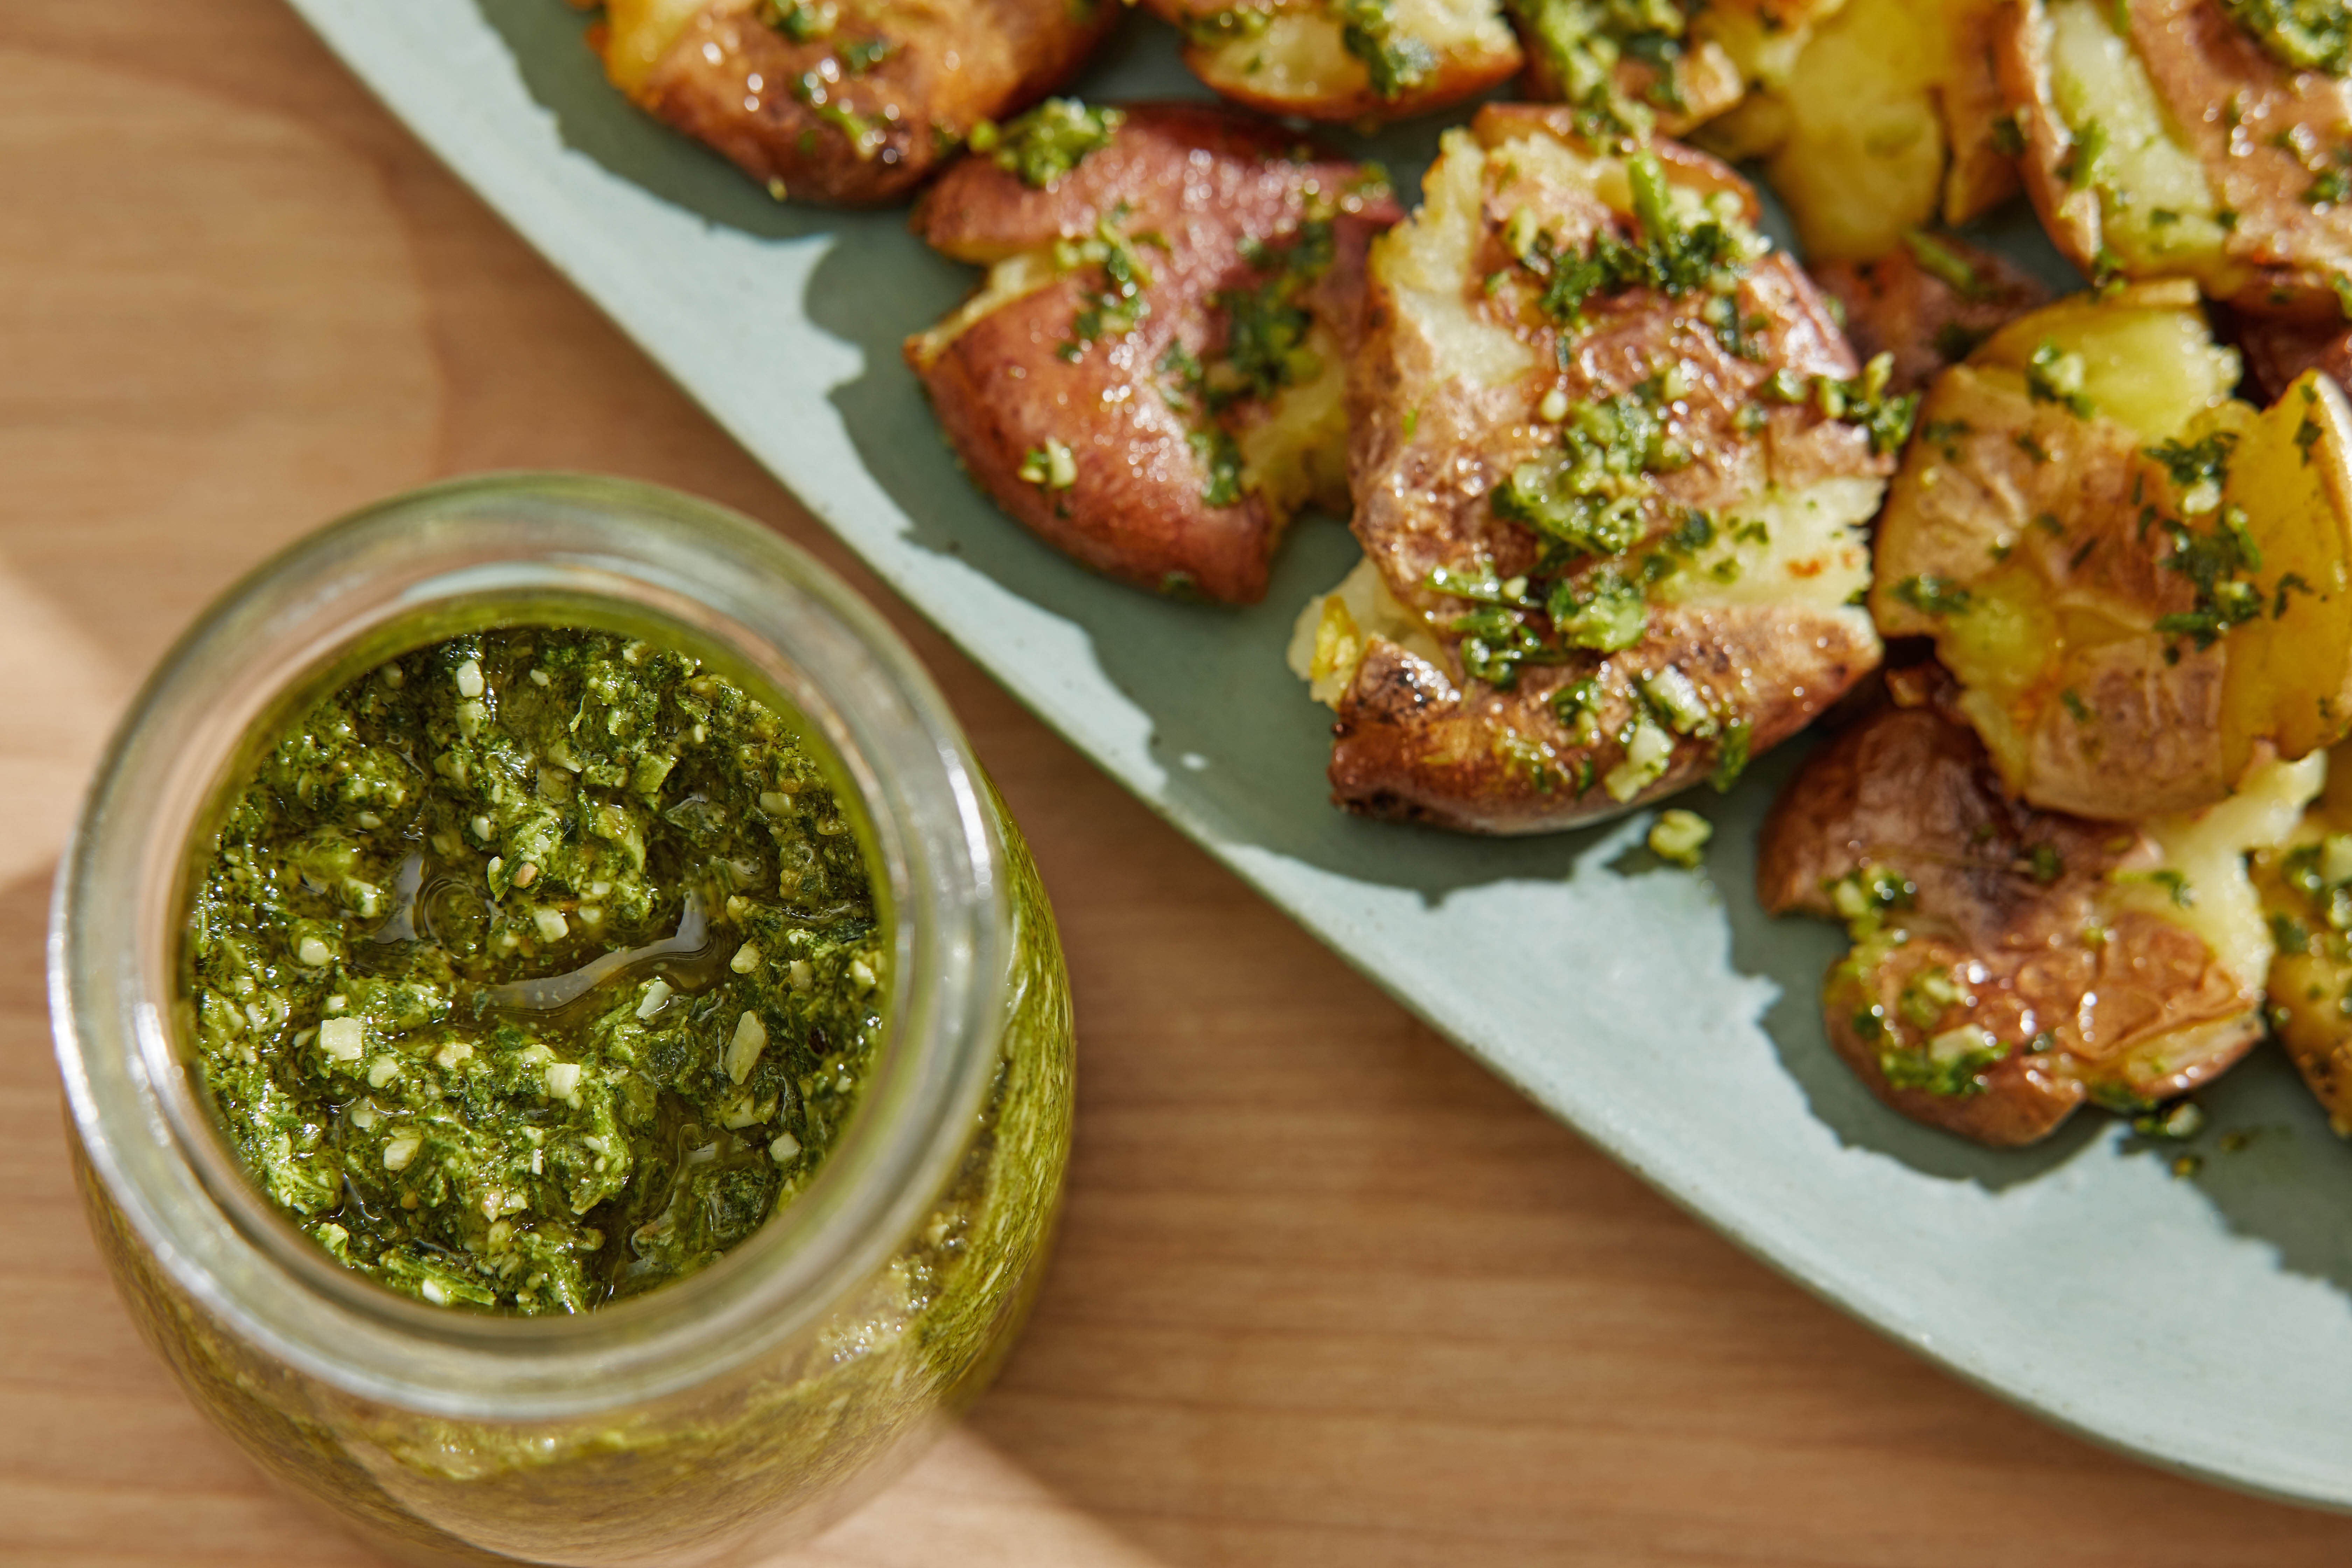 This fun twist on pesto is not only delicious, it’s healthy and also cuts down on kitchen waste